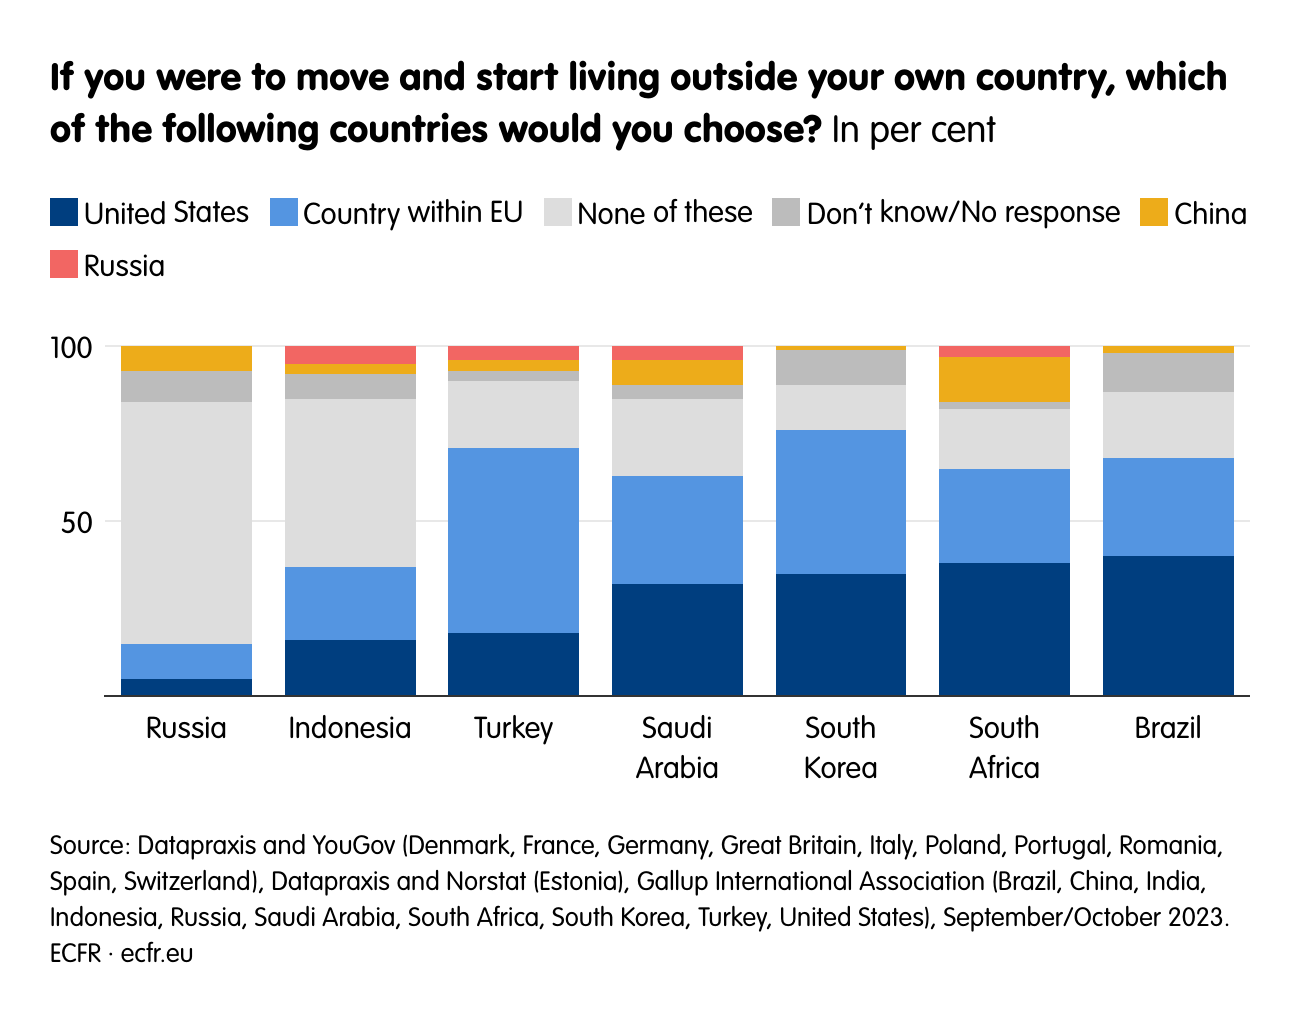 If you were to move and start living outside your own country, which of the following countries would you choose?